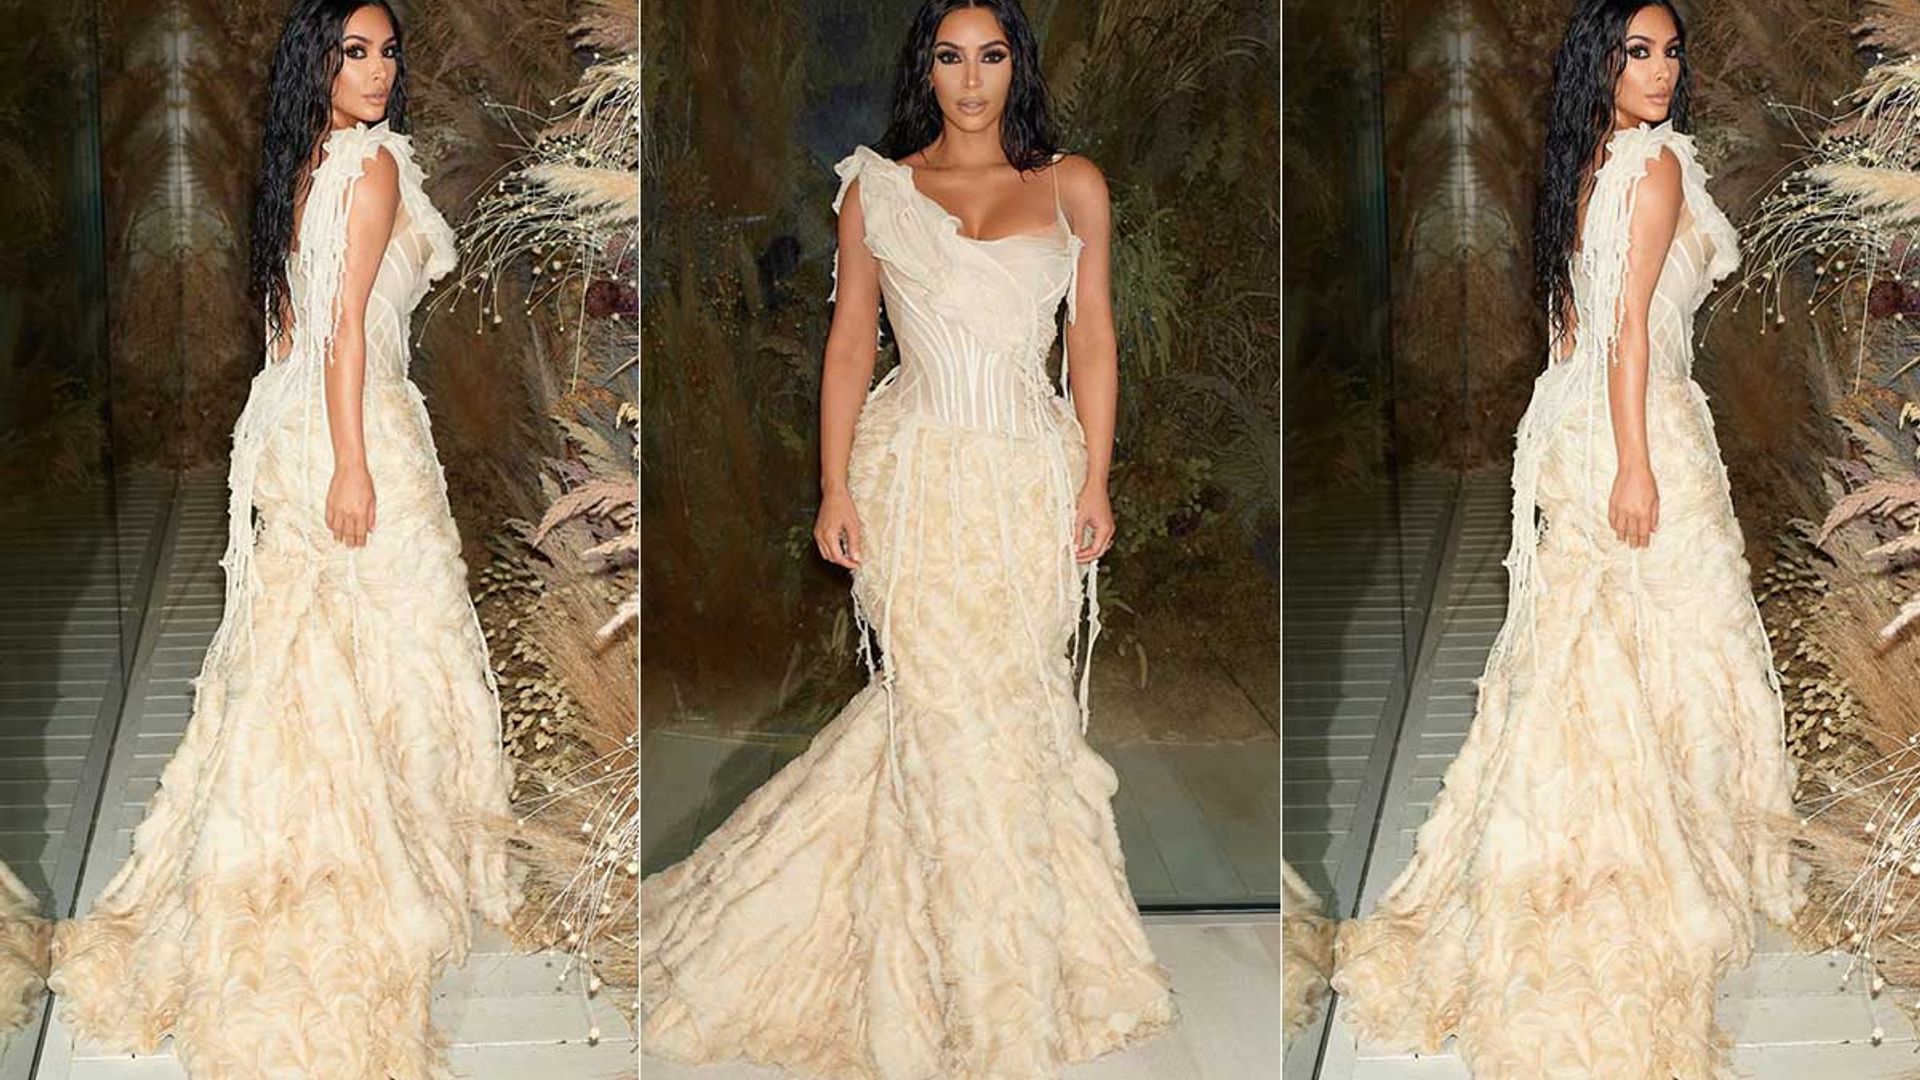 Kim Kardashian wows in an iconic Alexander McQueen gown at the Oscars afterparty